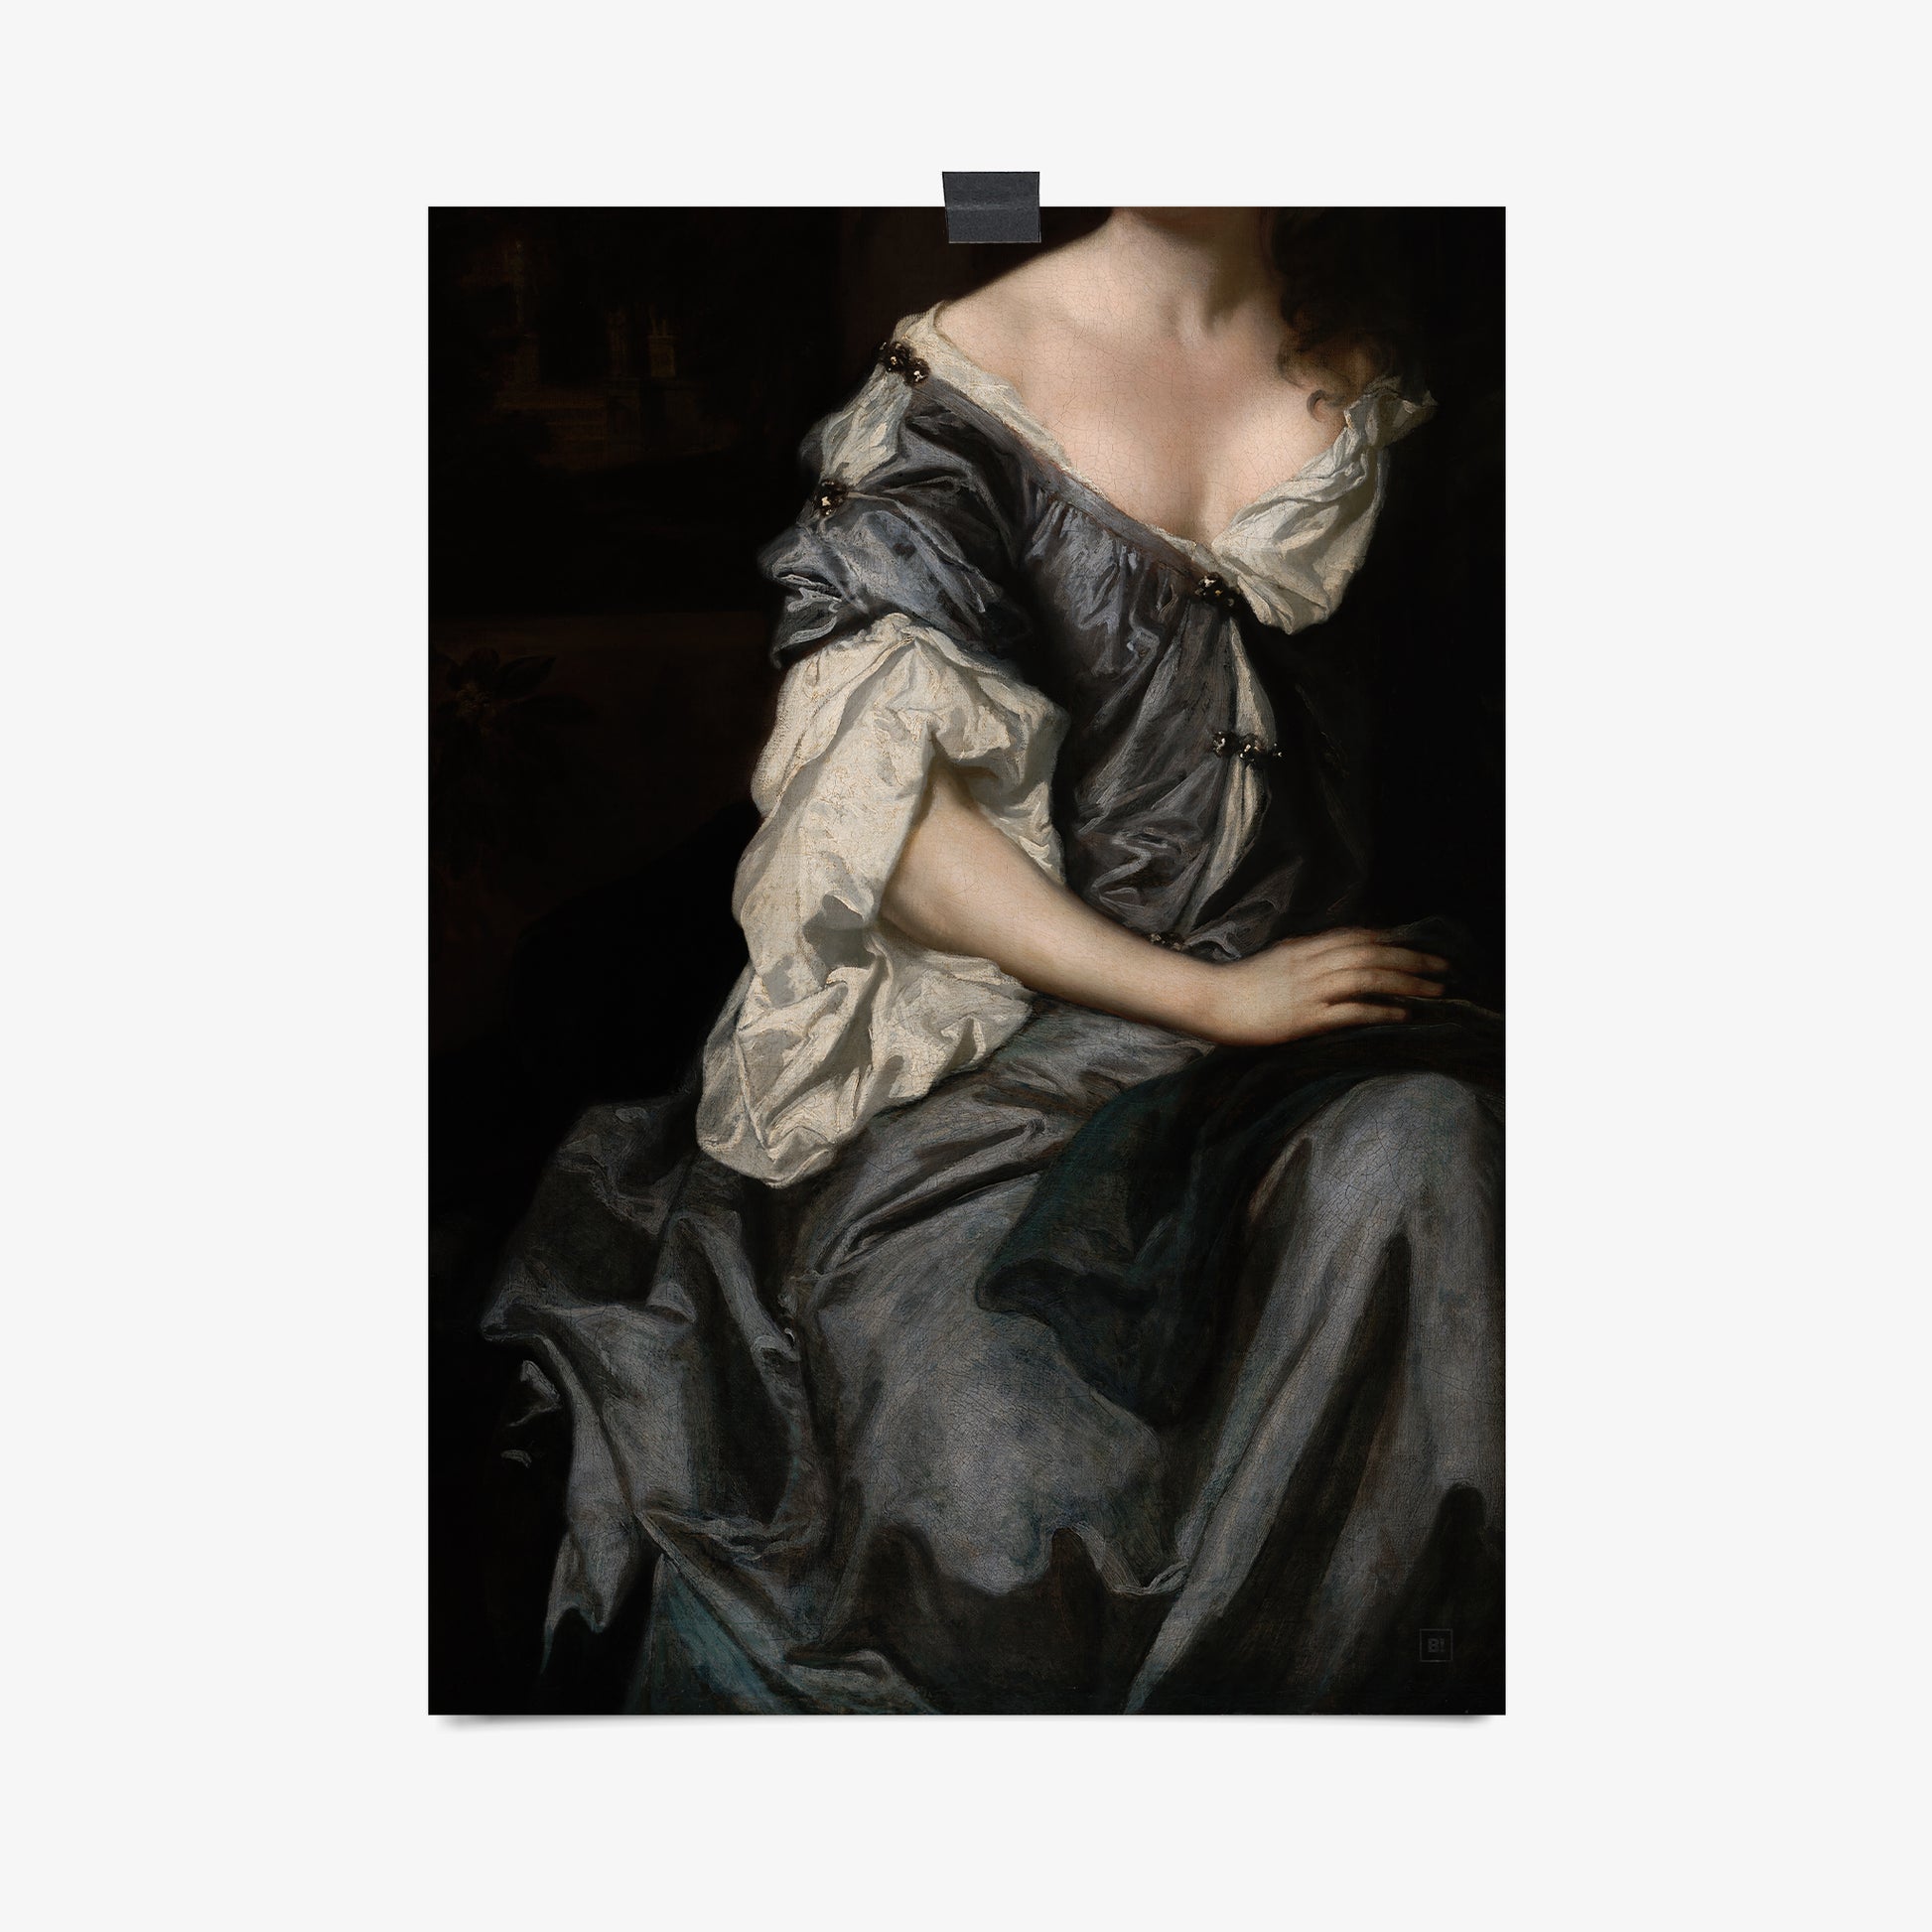 Be inspired by our altered Victorian Woman in Gray Satin Dress art print. This artwork was printed using the giclée process on archival acid-free paper that captures its timeless beauty in every detail.